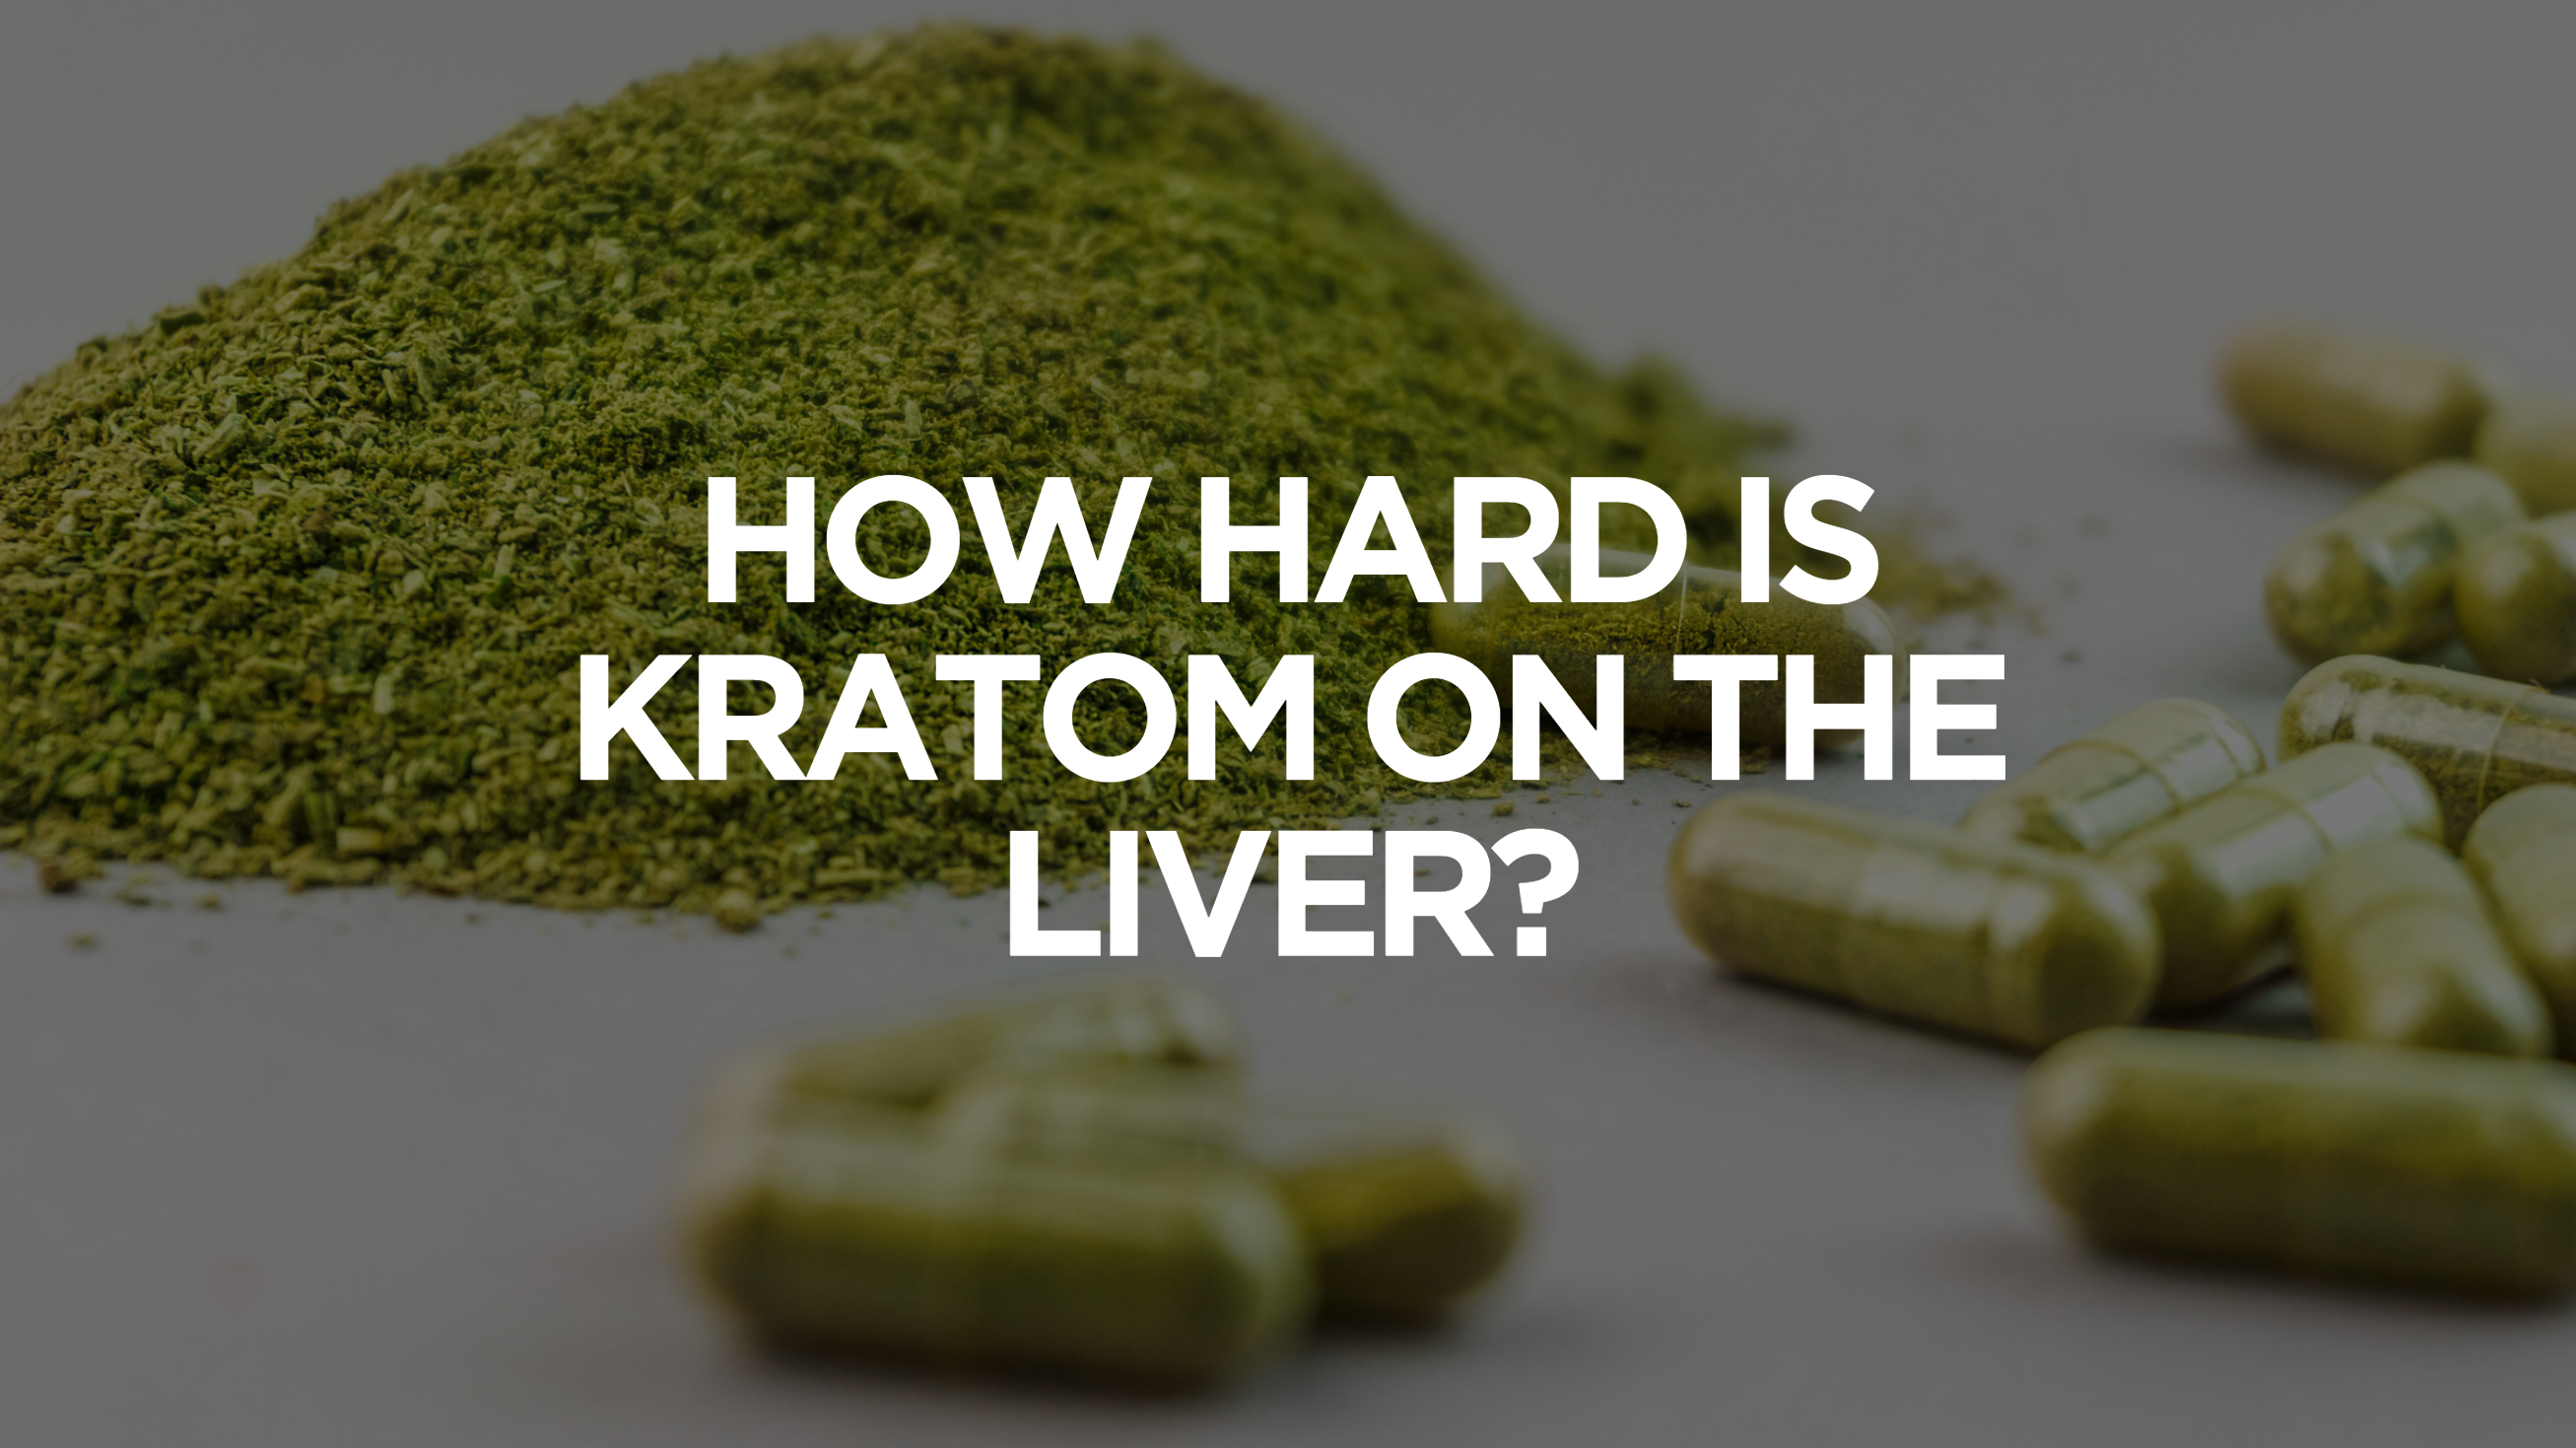 How hard is Kratom on the liver?